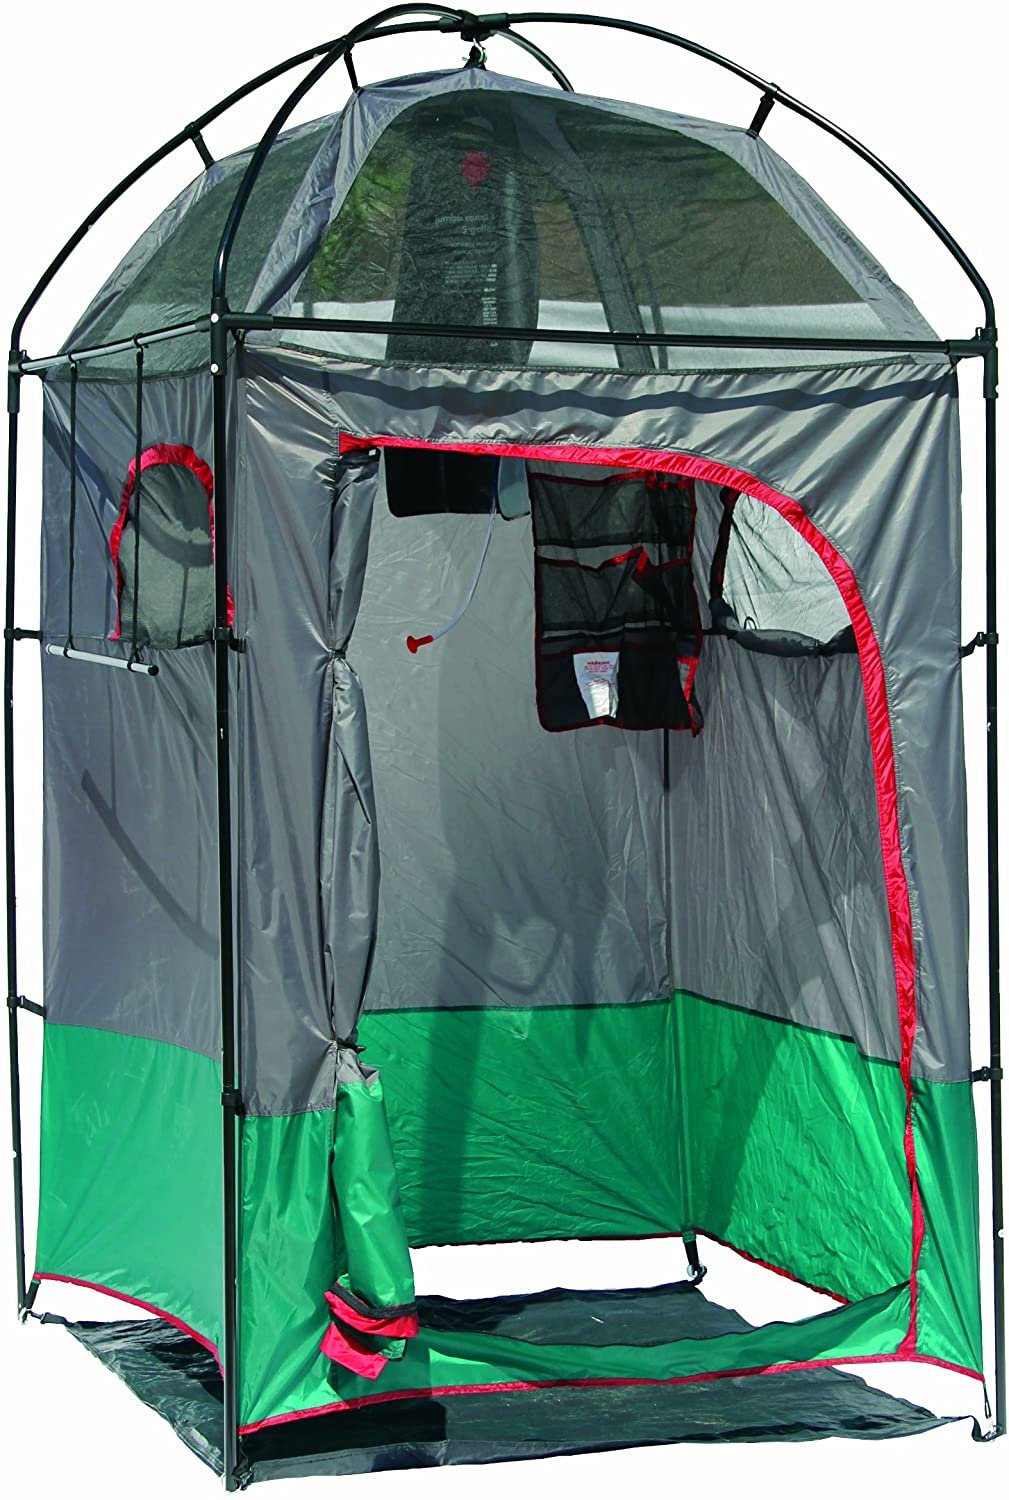 Texsport Instant Portable Outdoor Camping Shower Privacy Shelter Changing  Room Gray 